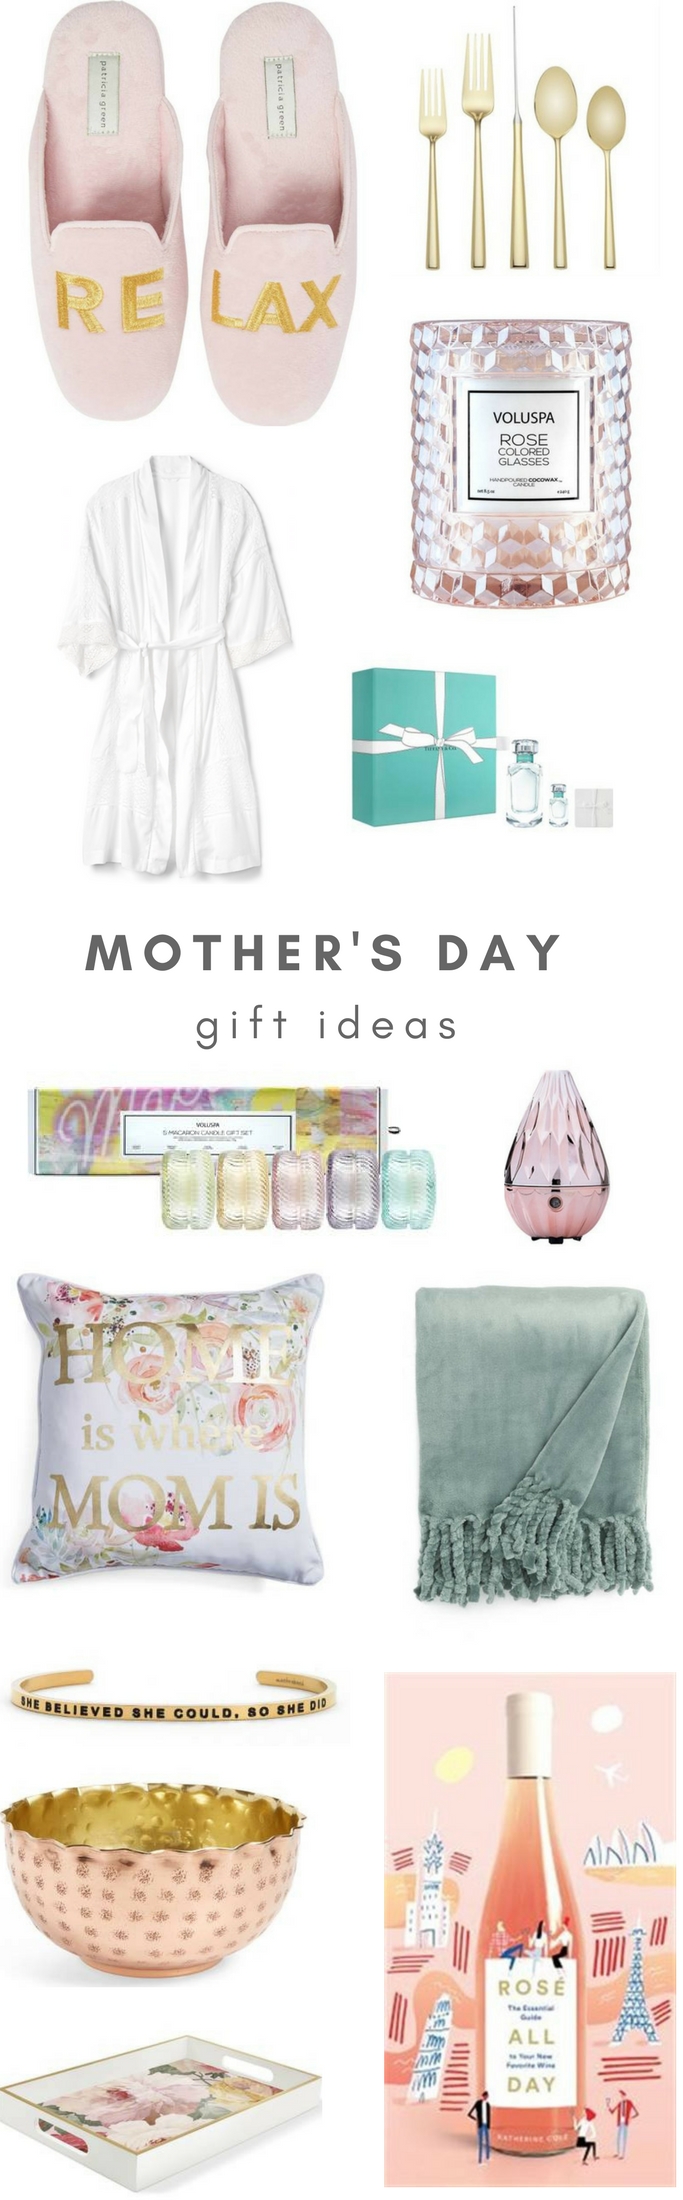 Mother's Day Gift Ideas - Luxe Mother's Day Gifts - Mothers Day Gifts 2018